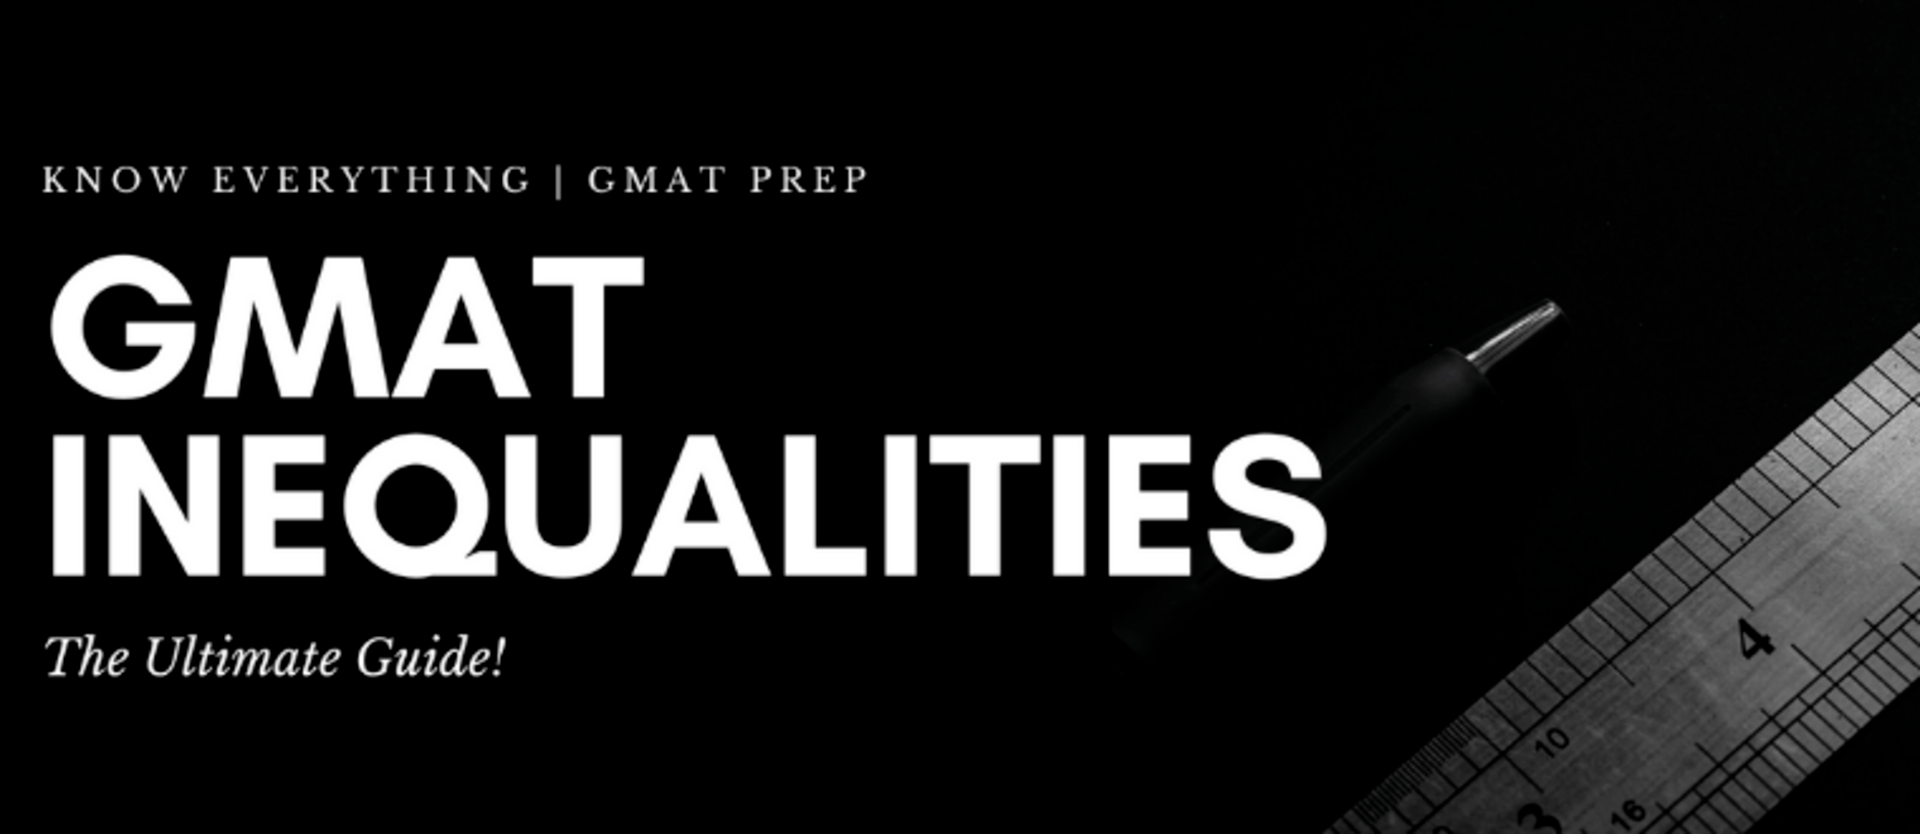 The Only Ultimate Guide To Gmat Inequalities